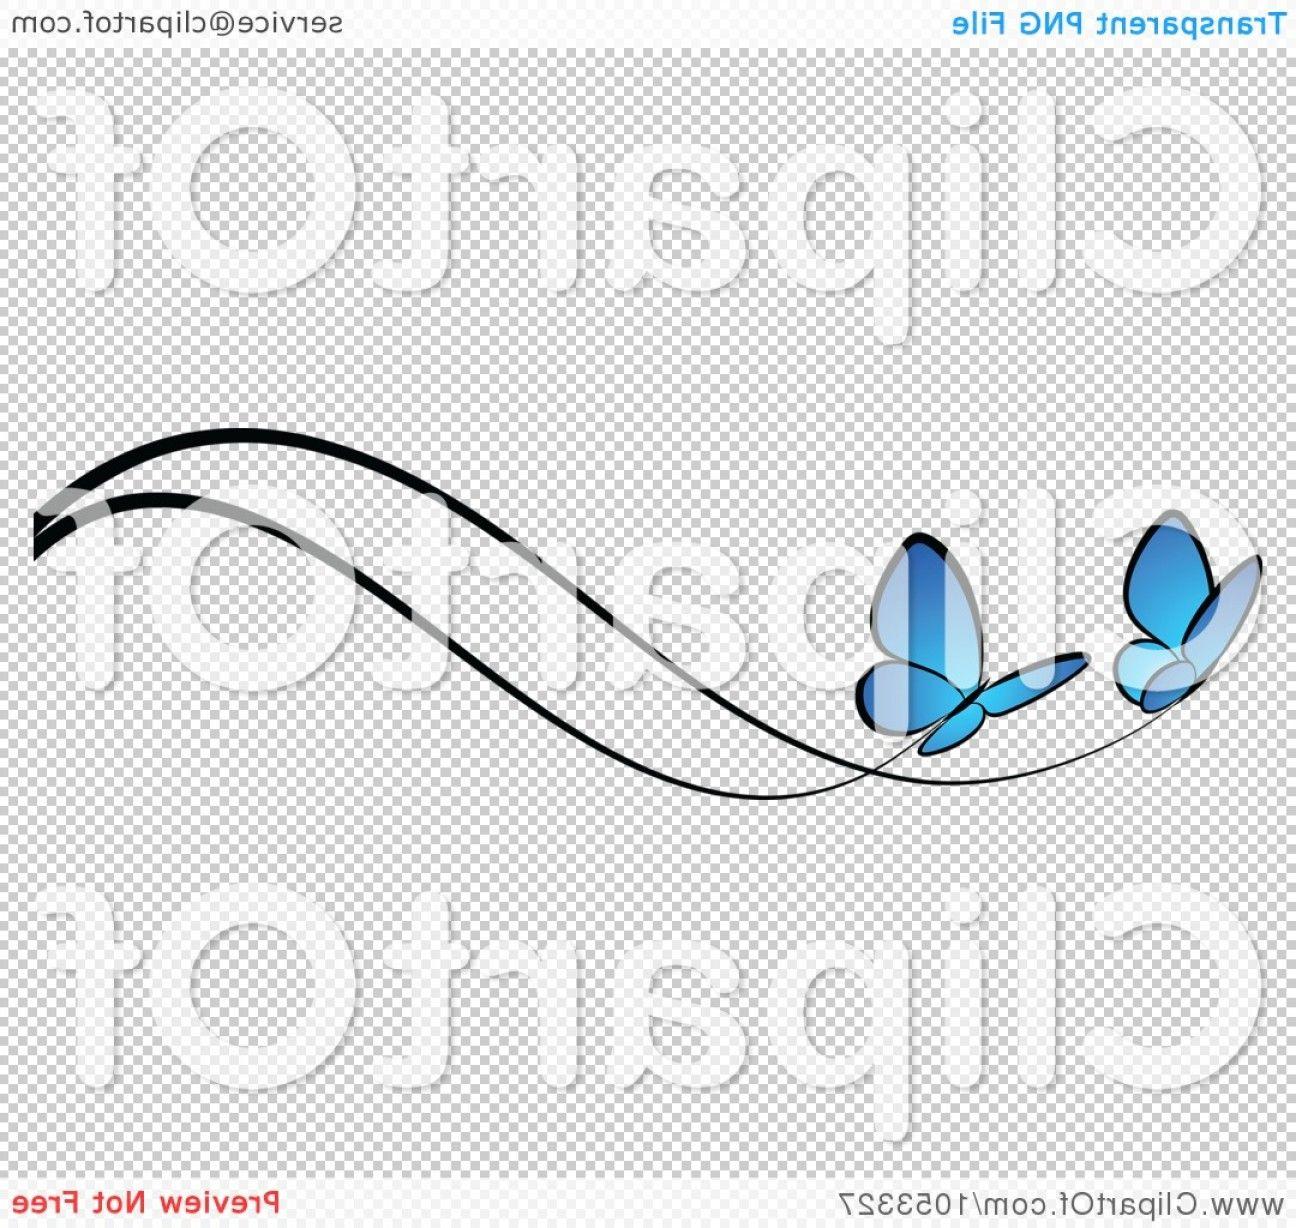 Two Blue Lines Logo - Border Of Two Blue Butterflies And Black Lines | SHOPATCLOTH